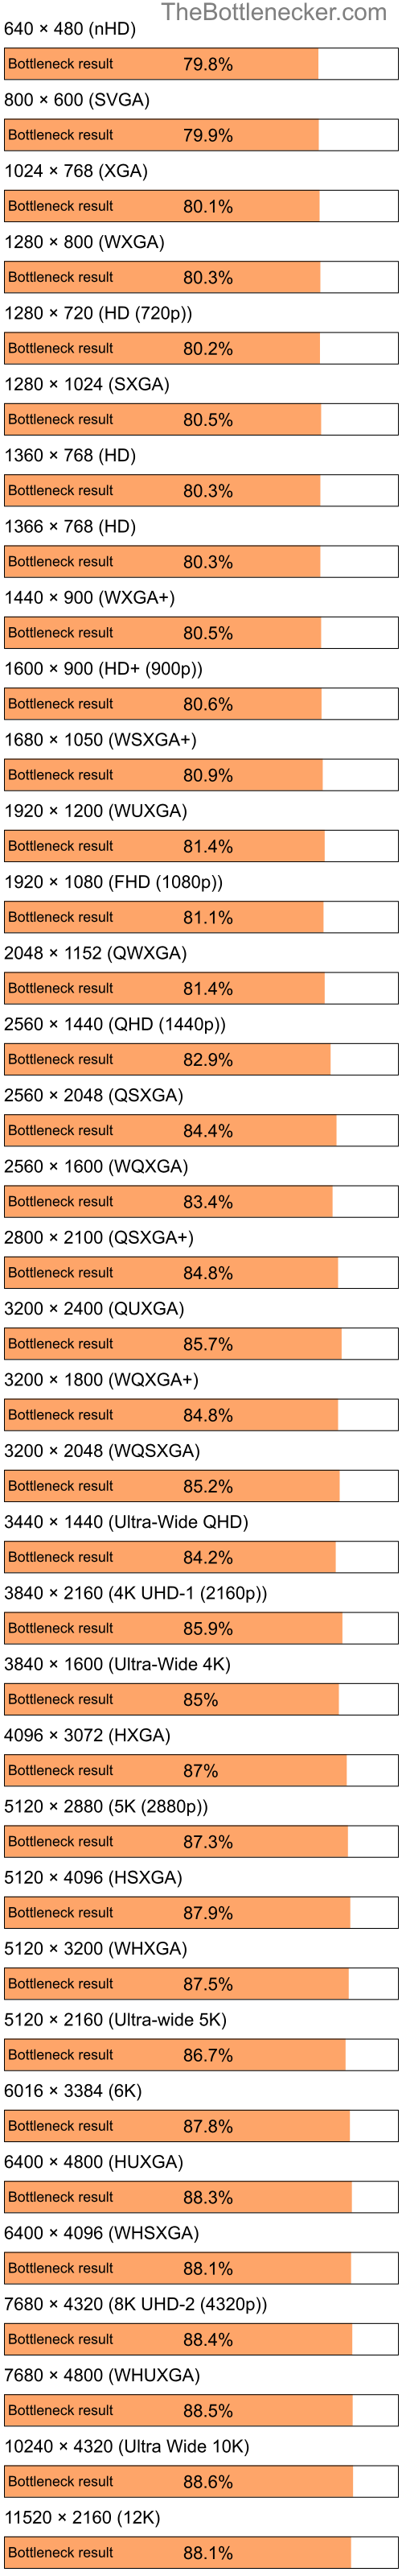 Bottleneck results by resolution for Intel Celeron M and NVIDIA GeForce FX 5900XT in Graphic Card Intense Tasks